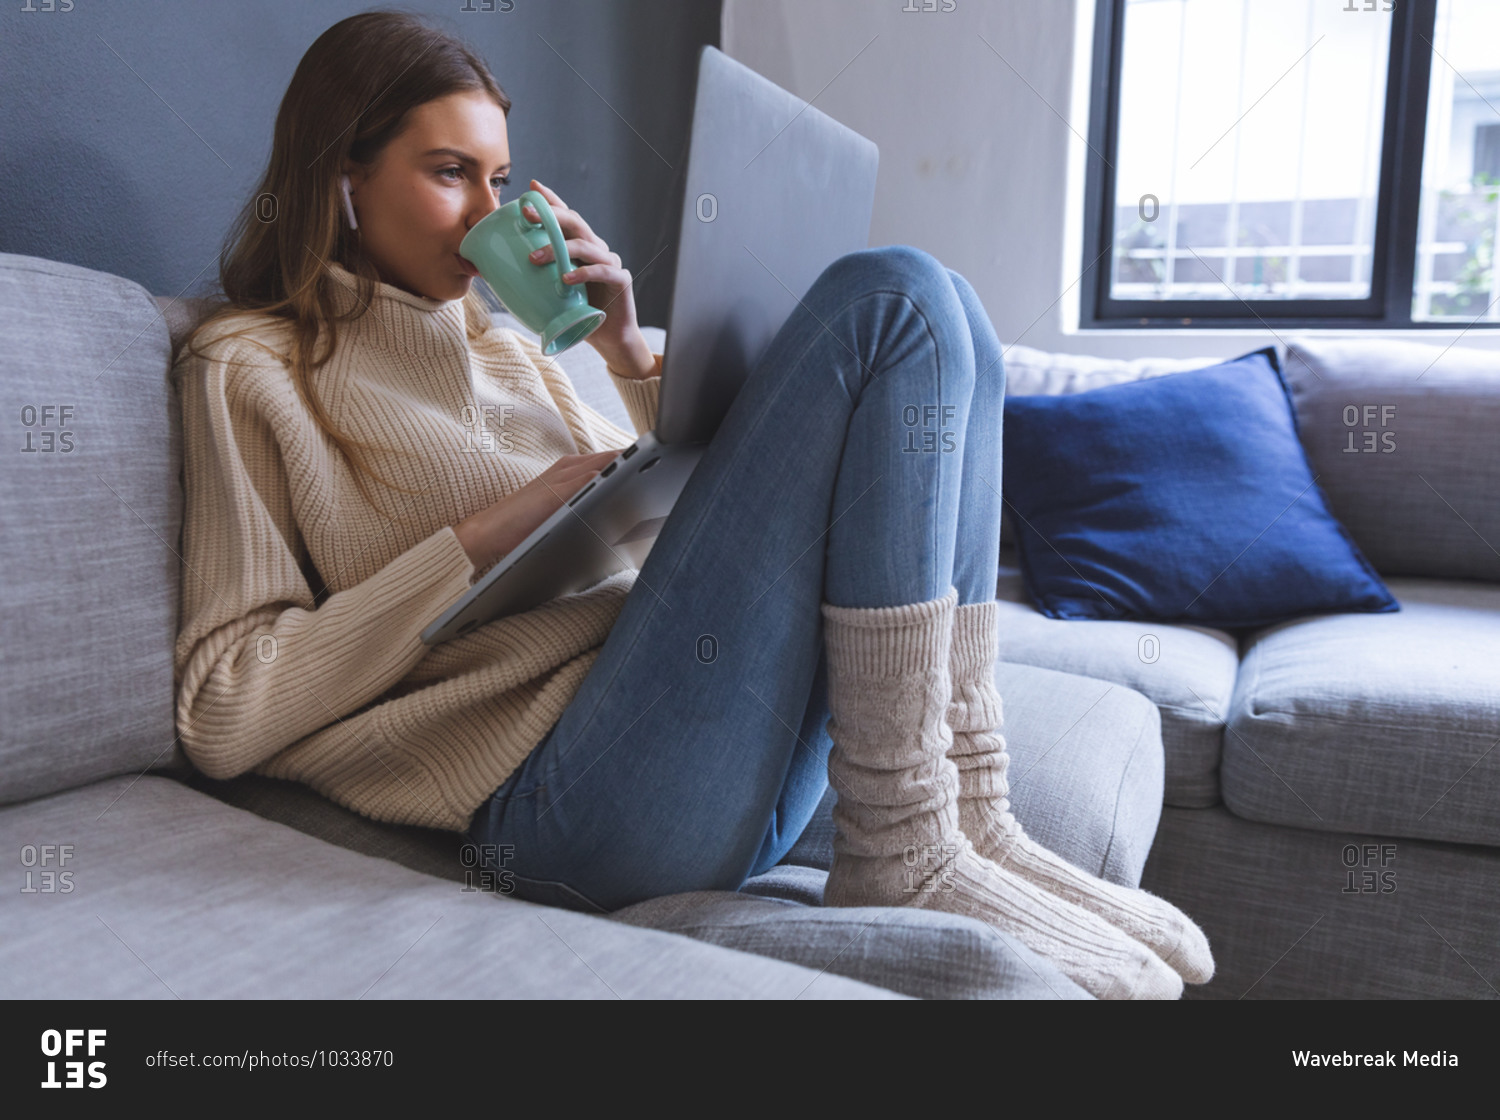 Caucasian woman spending time at home, sitting on sofa in sitting room using laptop computer with earphones, holding mug, drinking. Social distancing during Covid 19 Coronavirus quarantine lockdown.